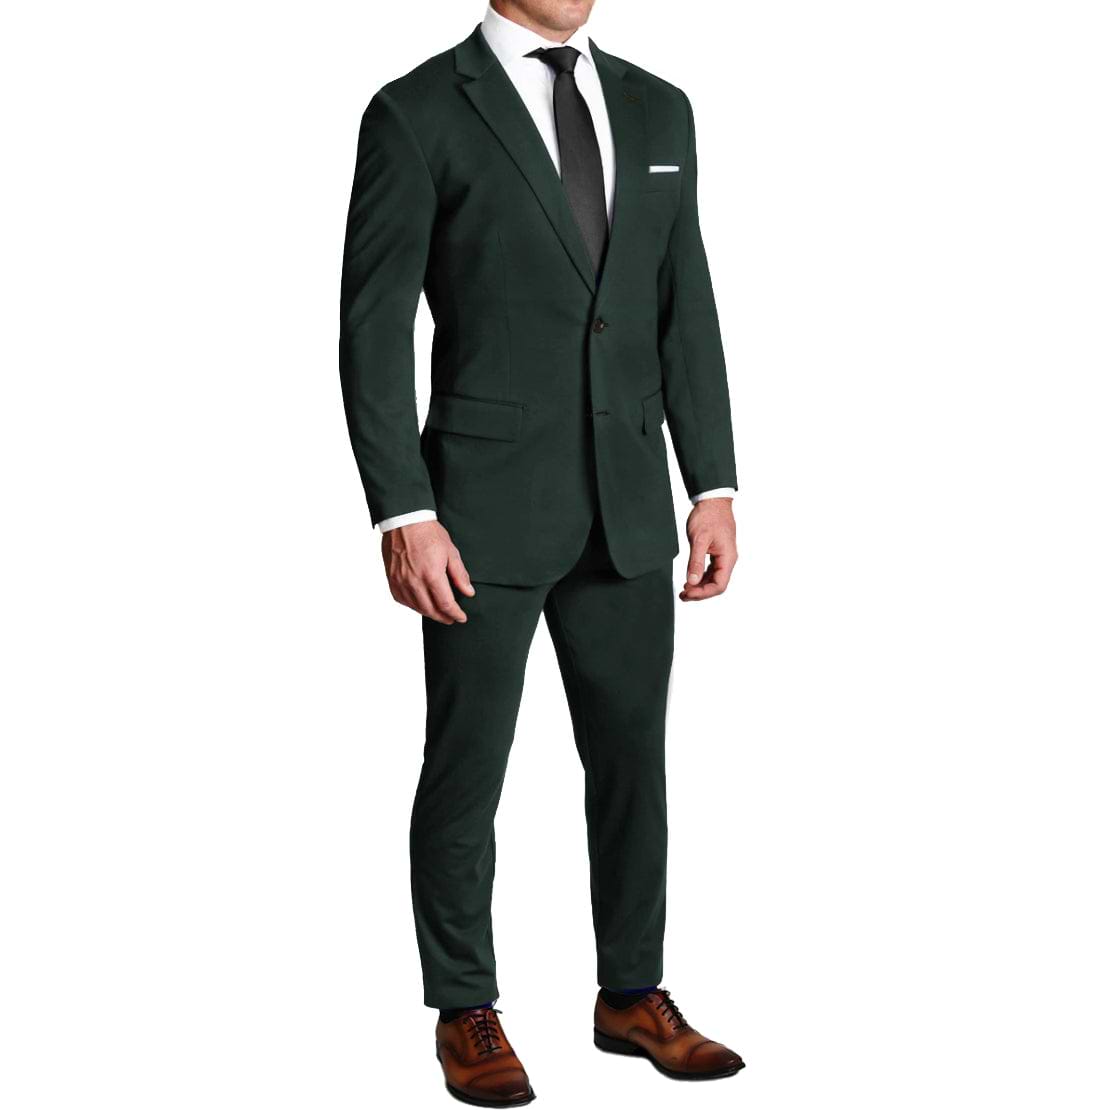 Athletic Fit Stretch Suit Pants - Solid Hunter Green